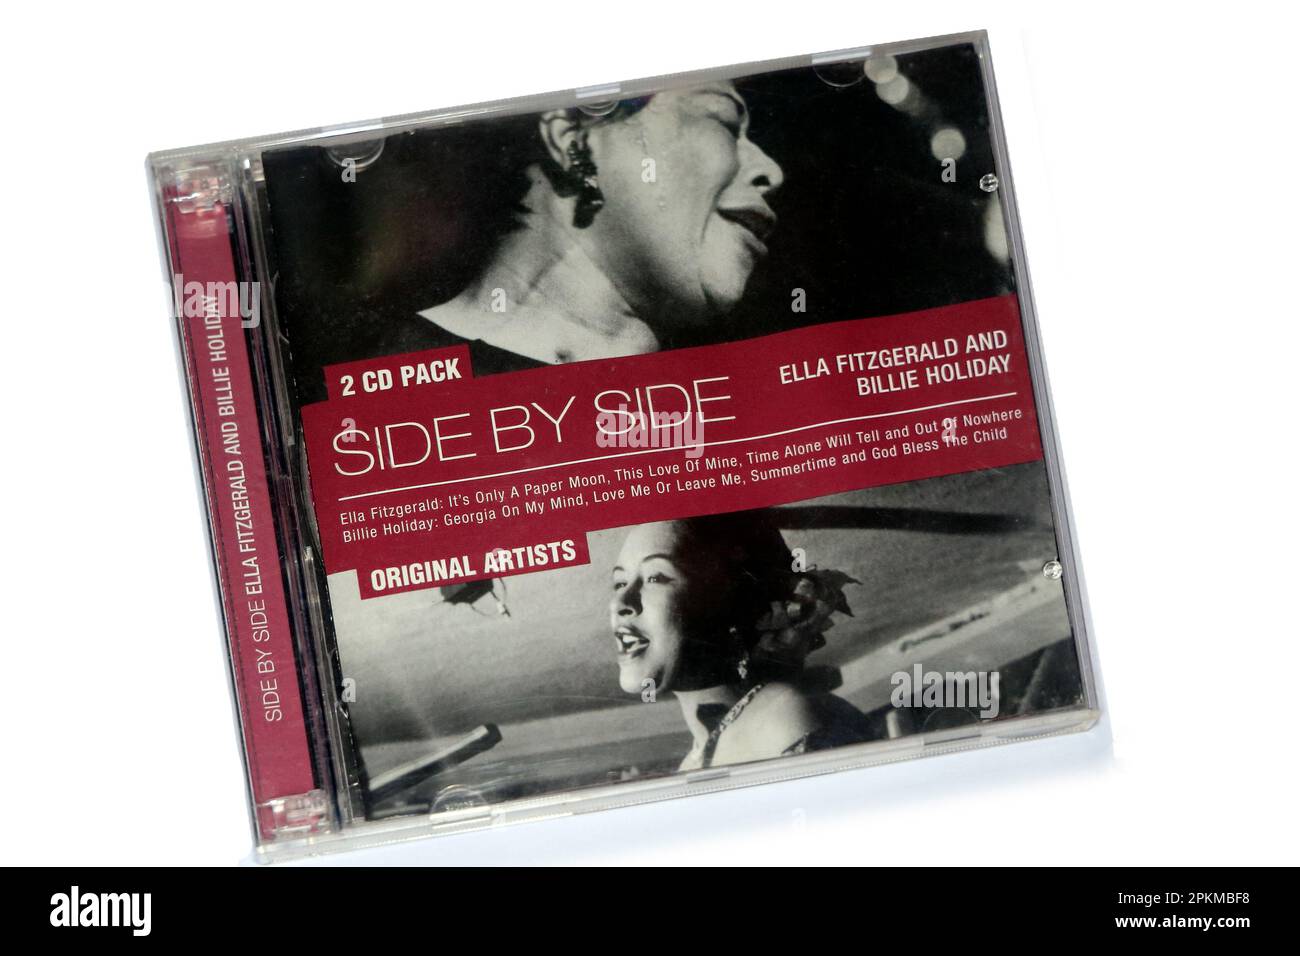 Ella Fitzgerald and Billie Holiday -Side By Side - Music CD cover. cym Stock Photo